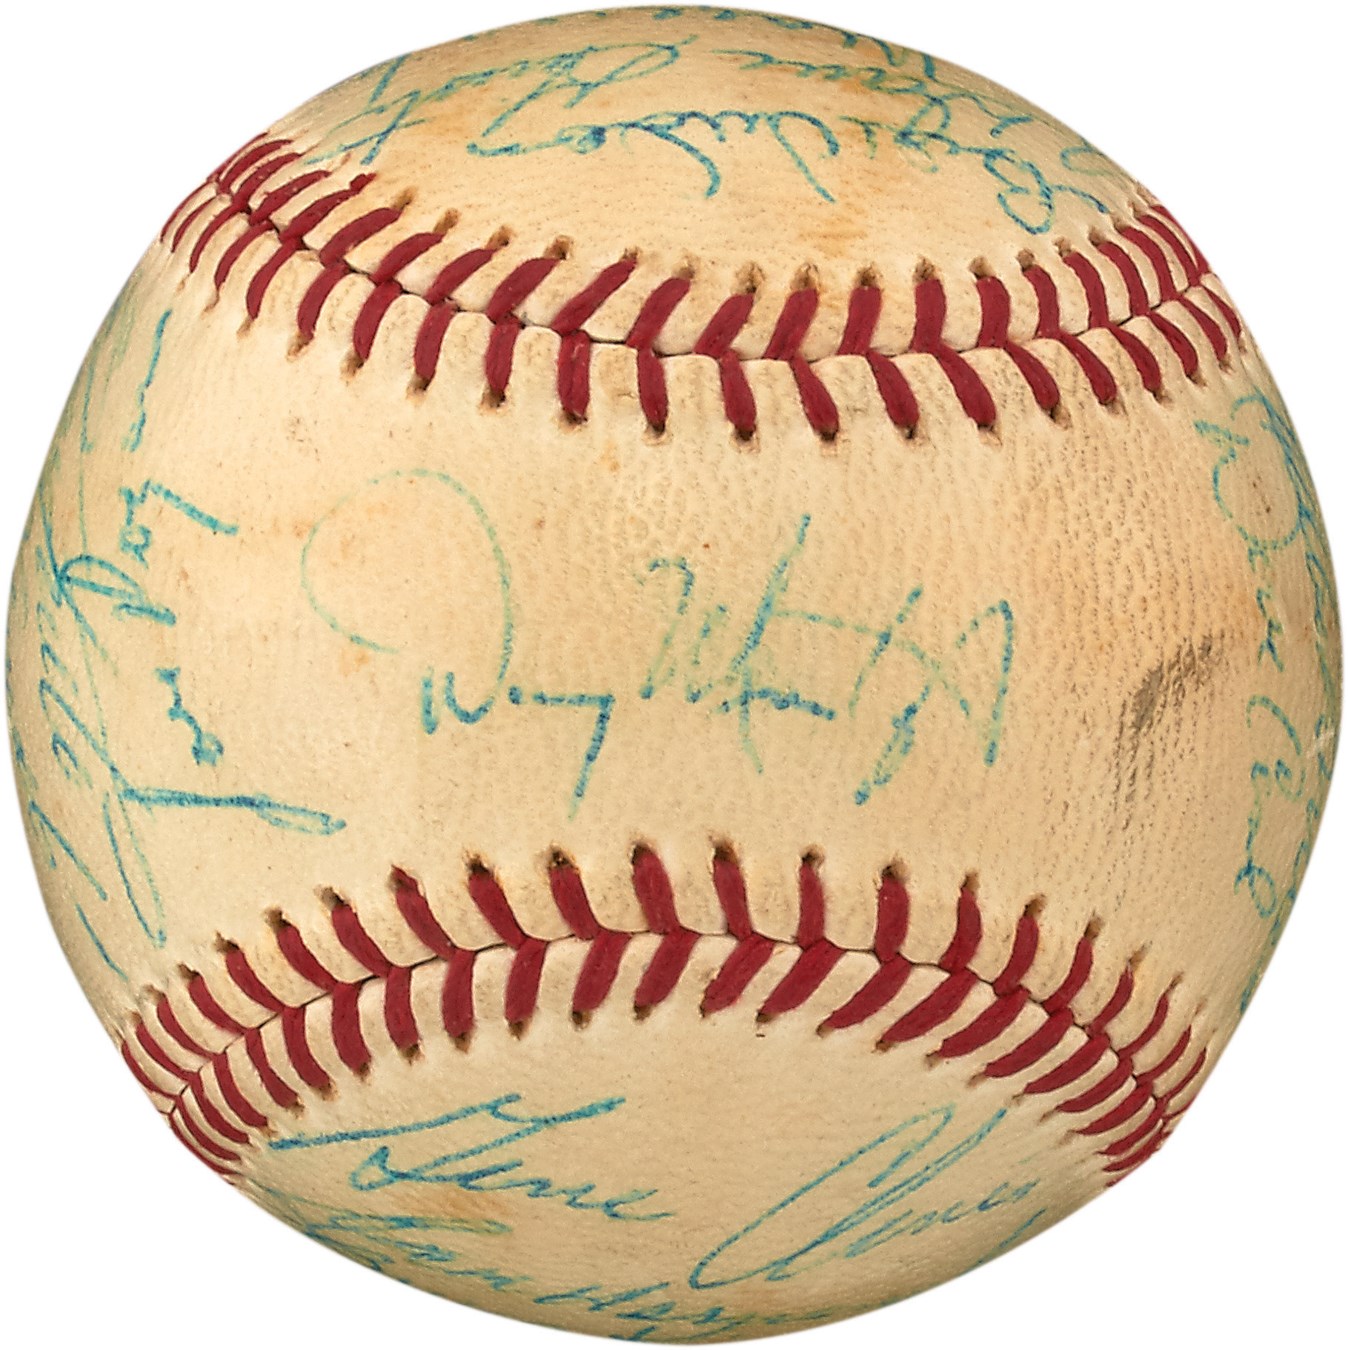 Clemente and Pittsburgh Pirates - 1971 World Champion Pittsburgh Pirates Team-Signed Baseball with Clemente (PSA/DNA)